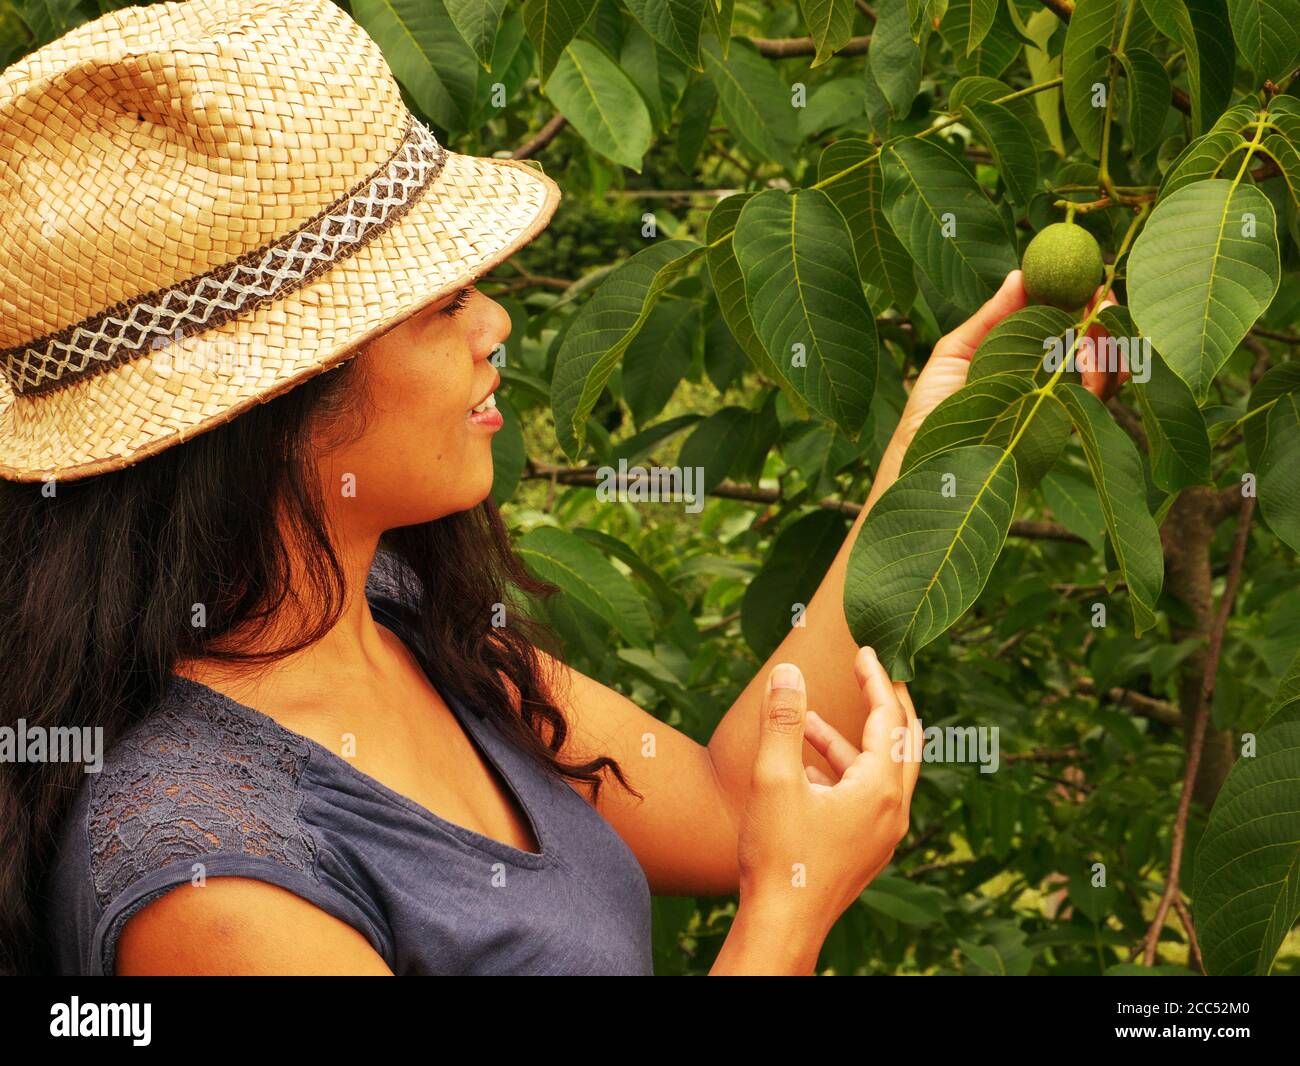 Close-up of an Afro-Asian woman picking fruit from a tree Stock Photo